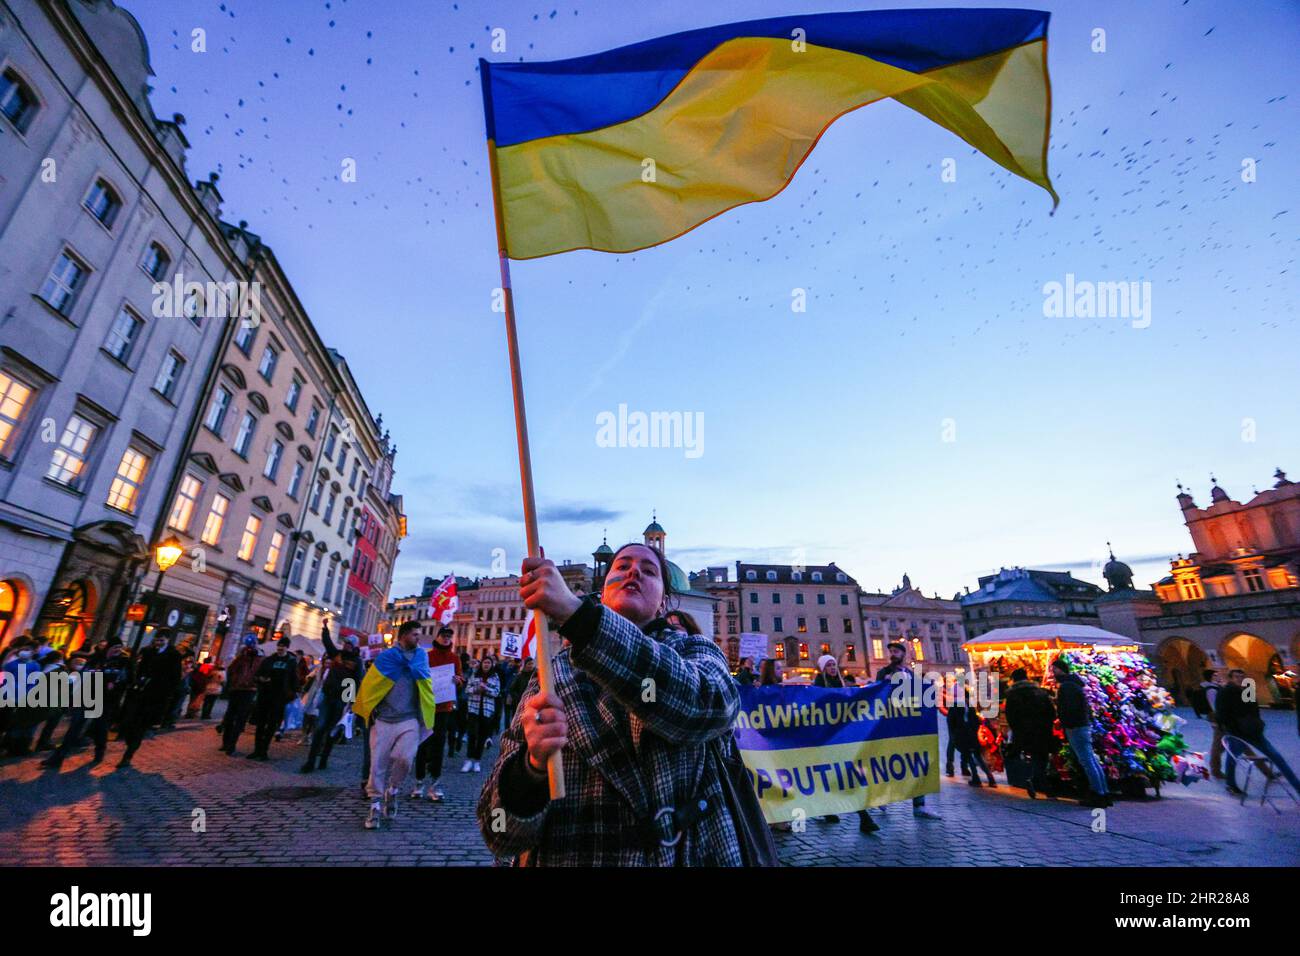 A member of Ukrainian community waves a flag during the protest.  Following the beginning of the Russian invasion of Ukraine, members of the Ukrainian Stock Photo